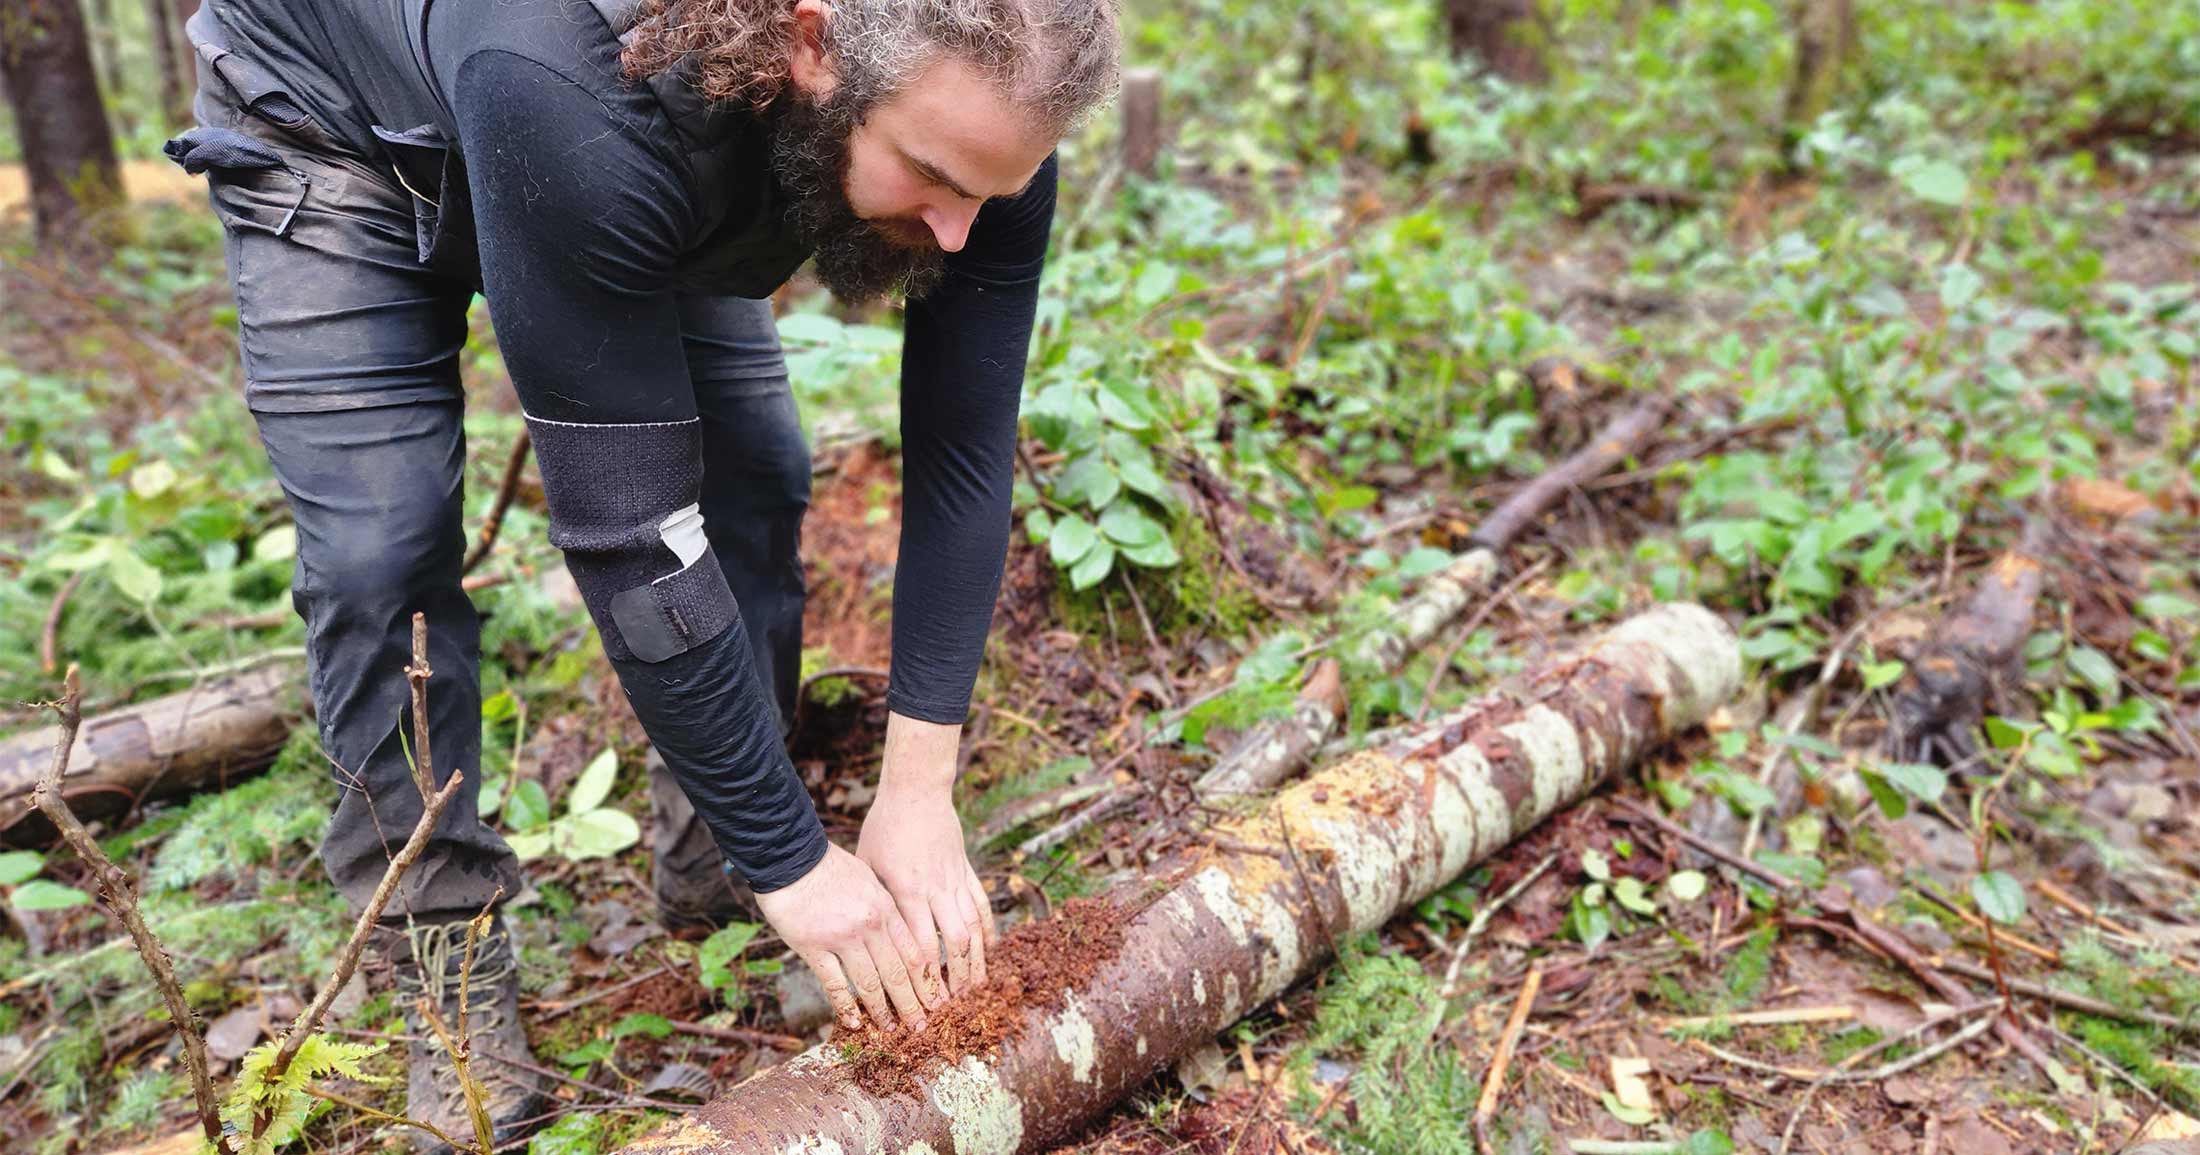 Tal grafting a log with his hands in a forest.